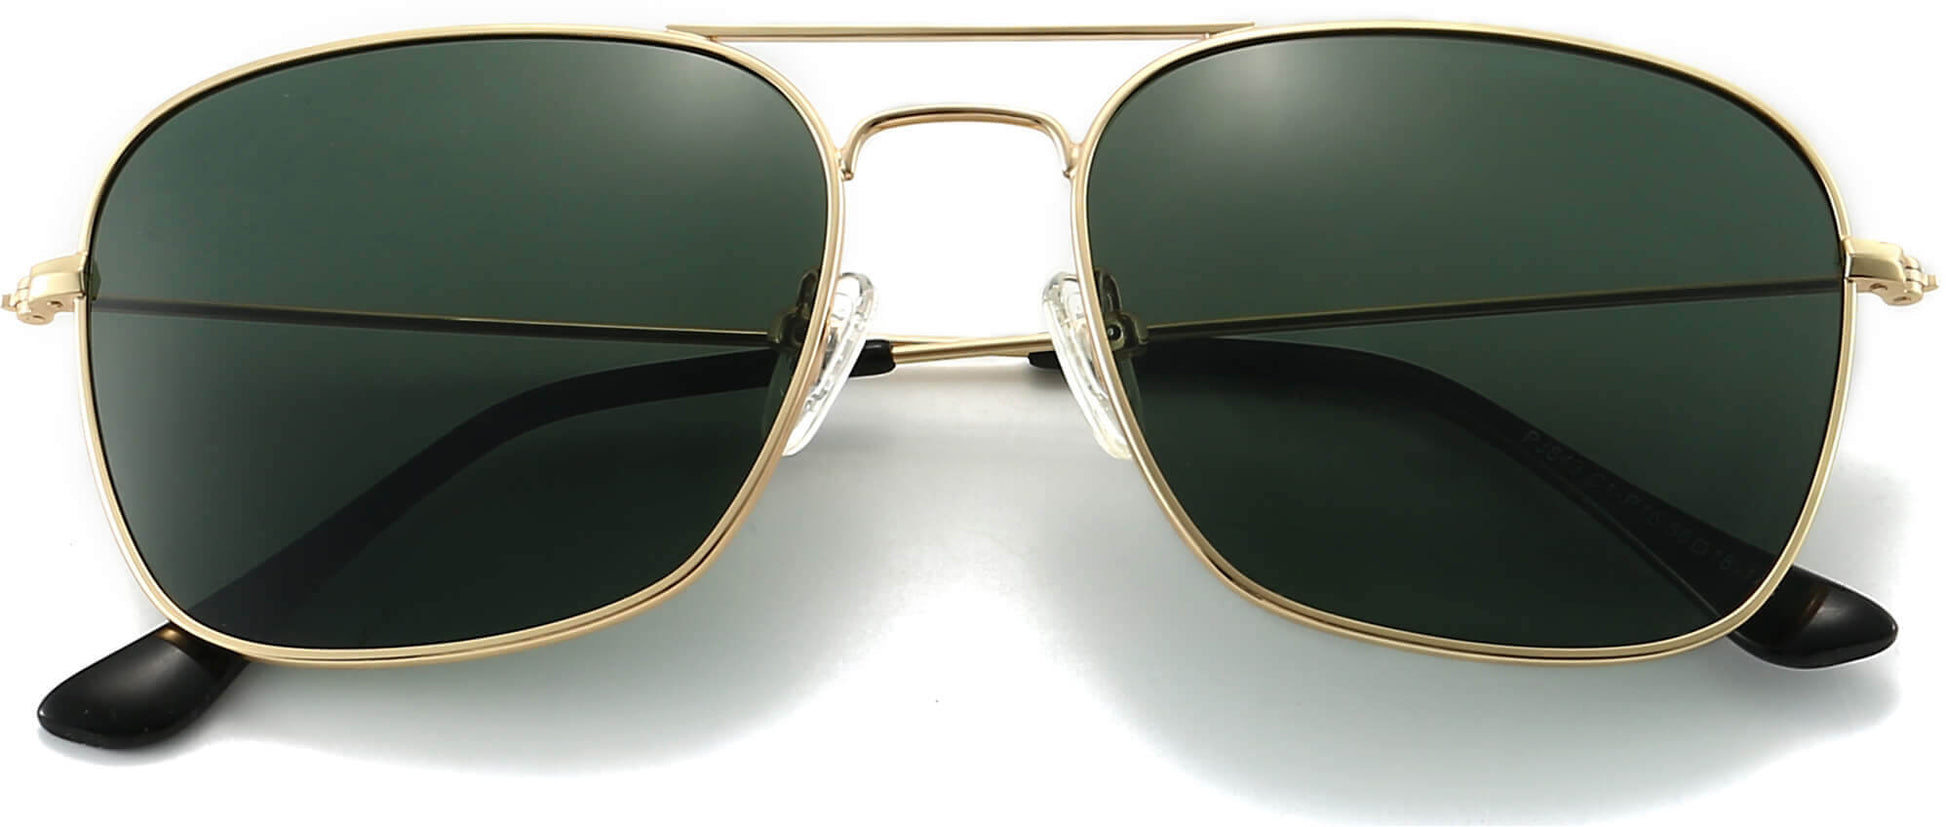 Sam Gold Stainless steel Sunglasses from ANRRI, closed view